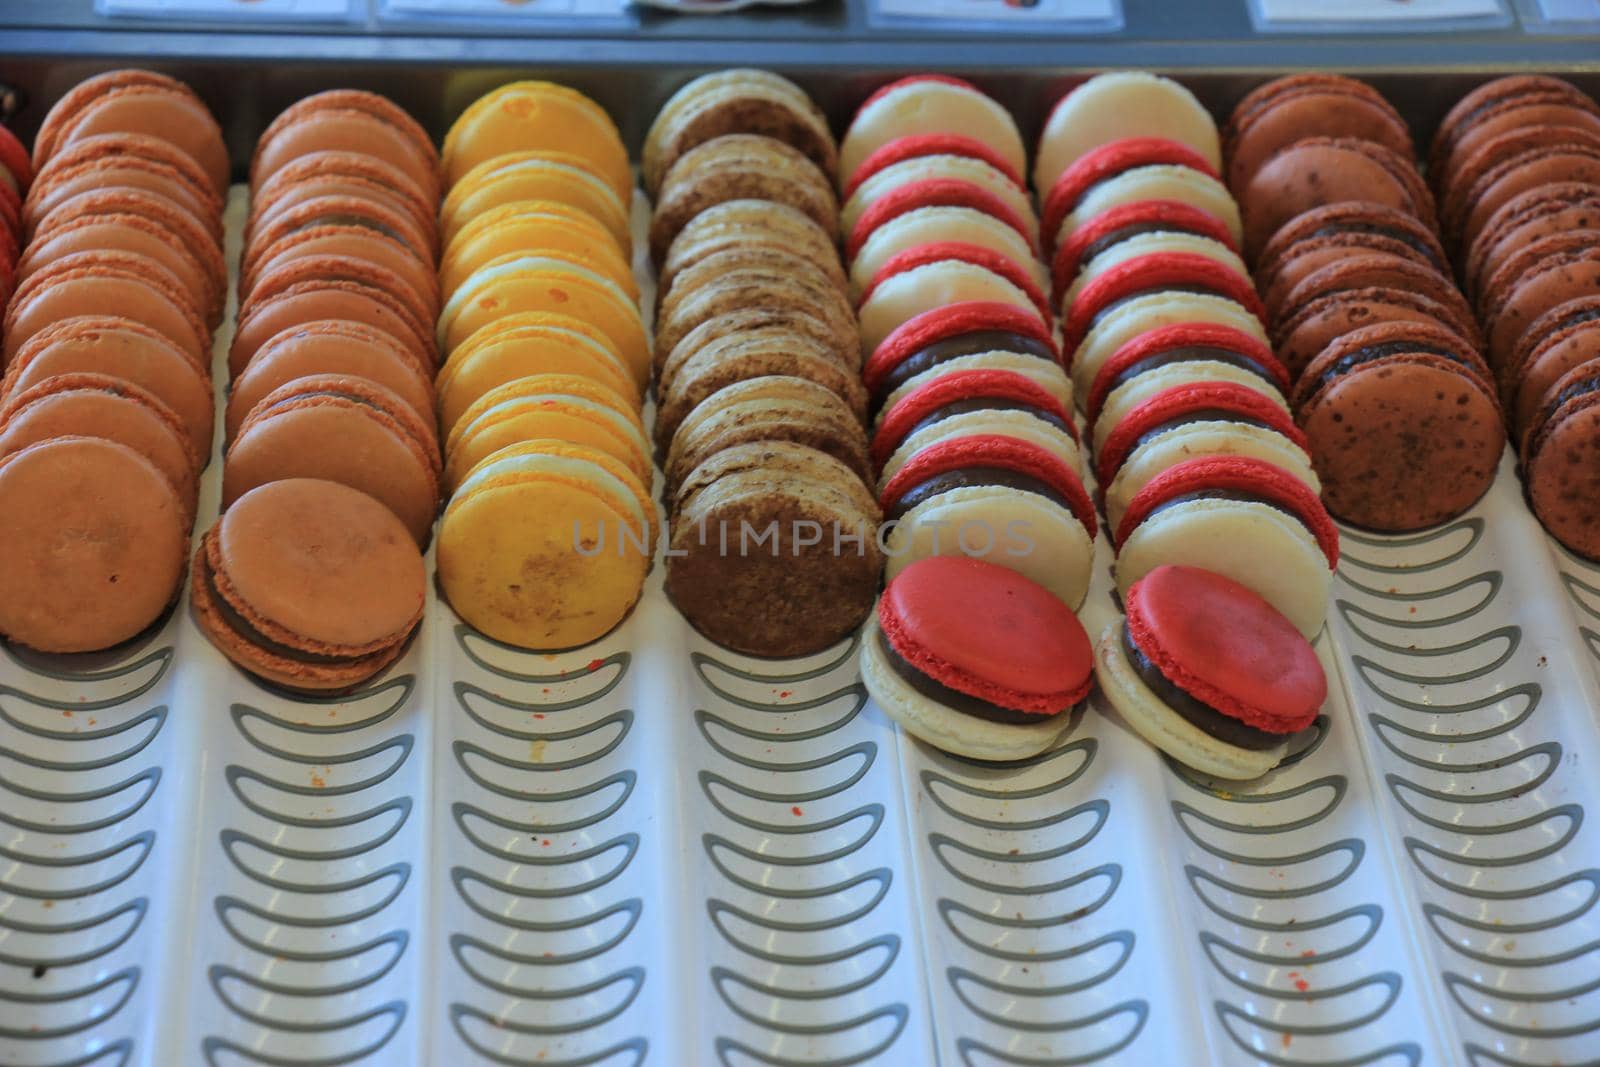 Macarons in various flavors and colors on display in a store